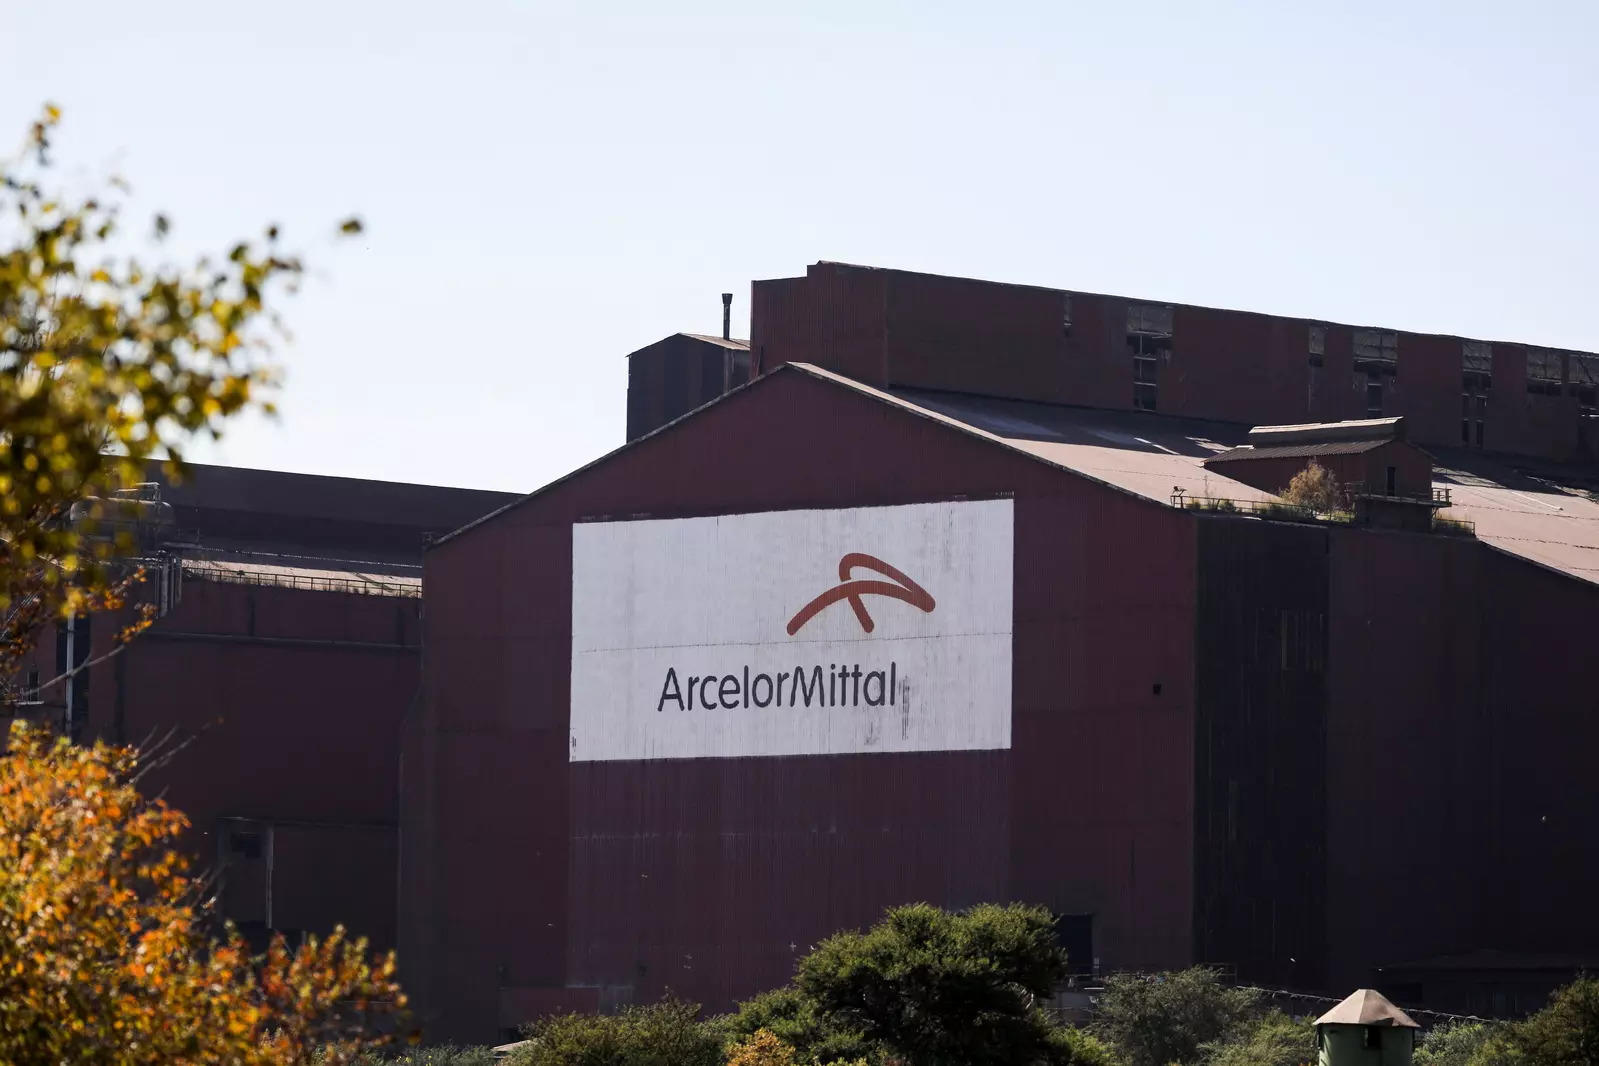 Luxembourg to buy half of ArcelorMittal headquarters